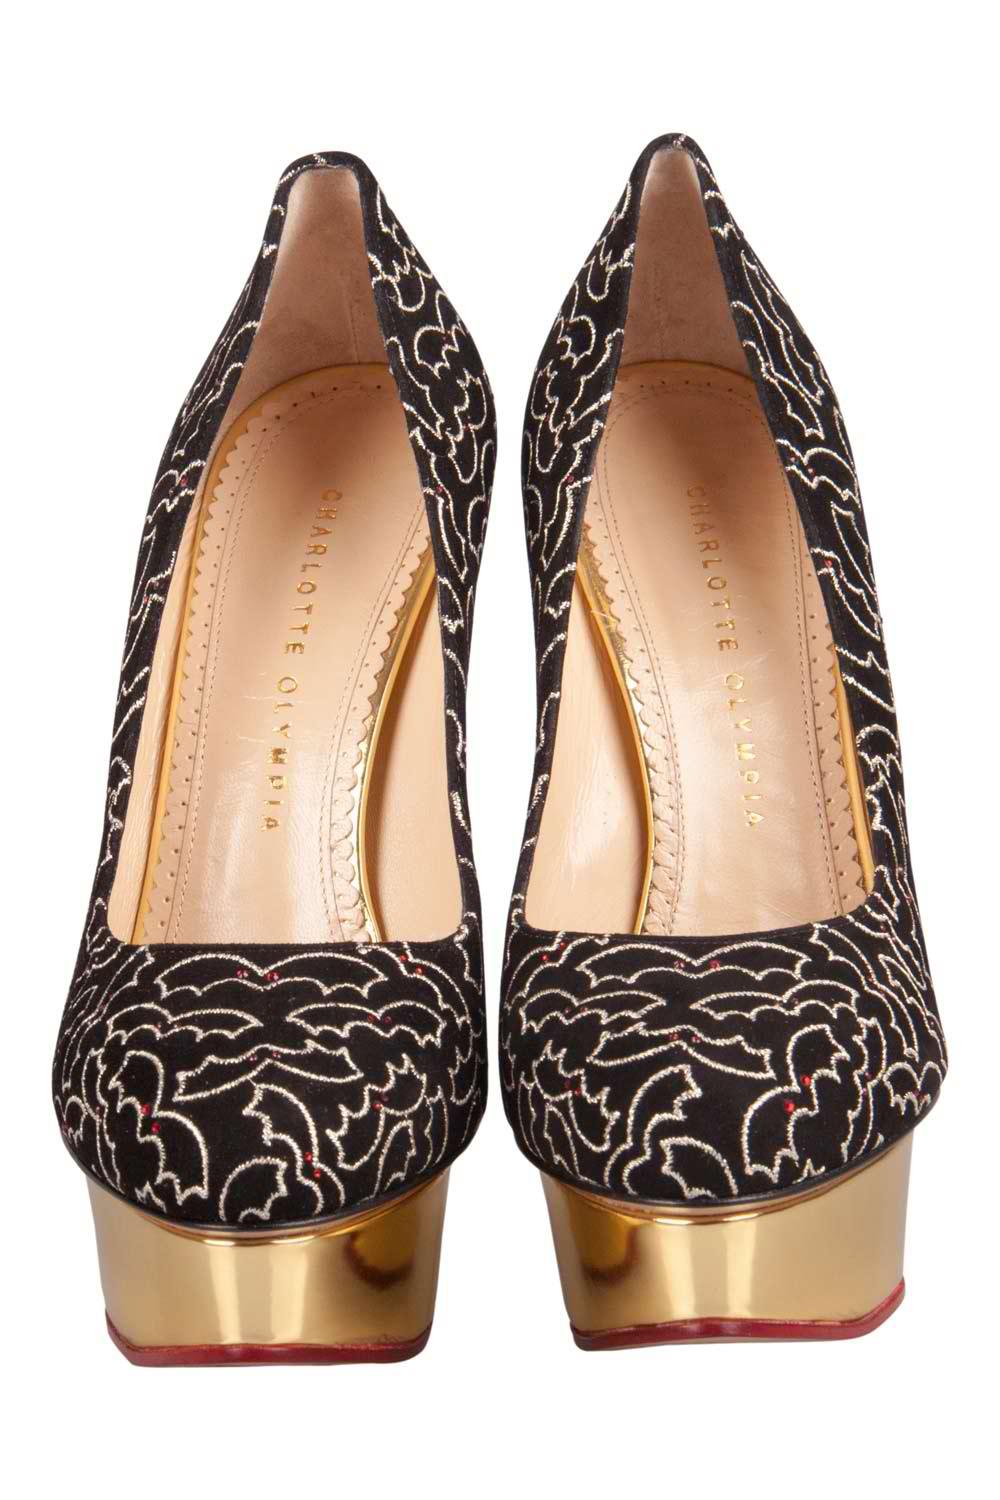 Own this meticulously designed pair of Charlotte Olympia pumps today and dazzle everyone whenever you step out! Crafted out of suede and lined with leather on the insoles, this creation features embroidery of bats all over. They have been beautified